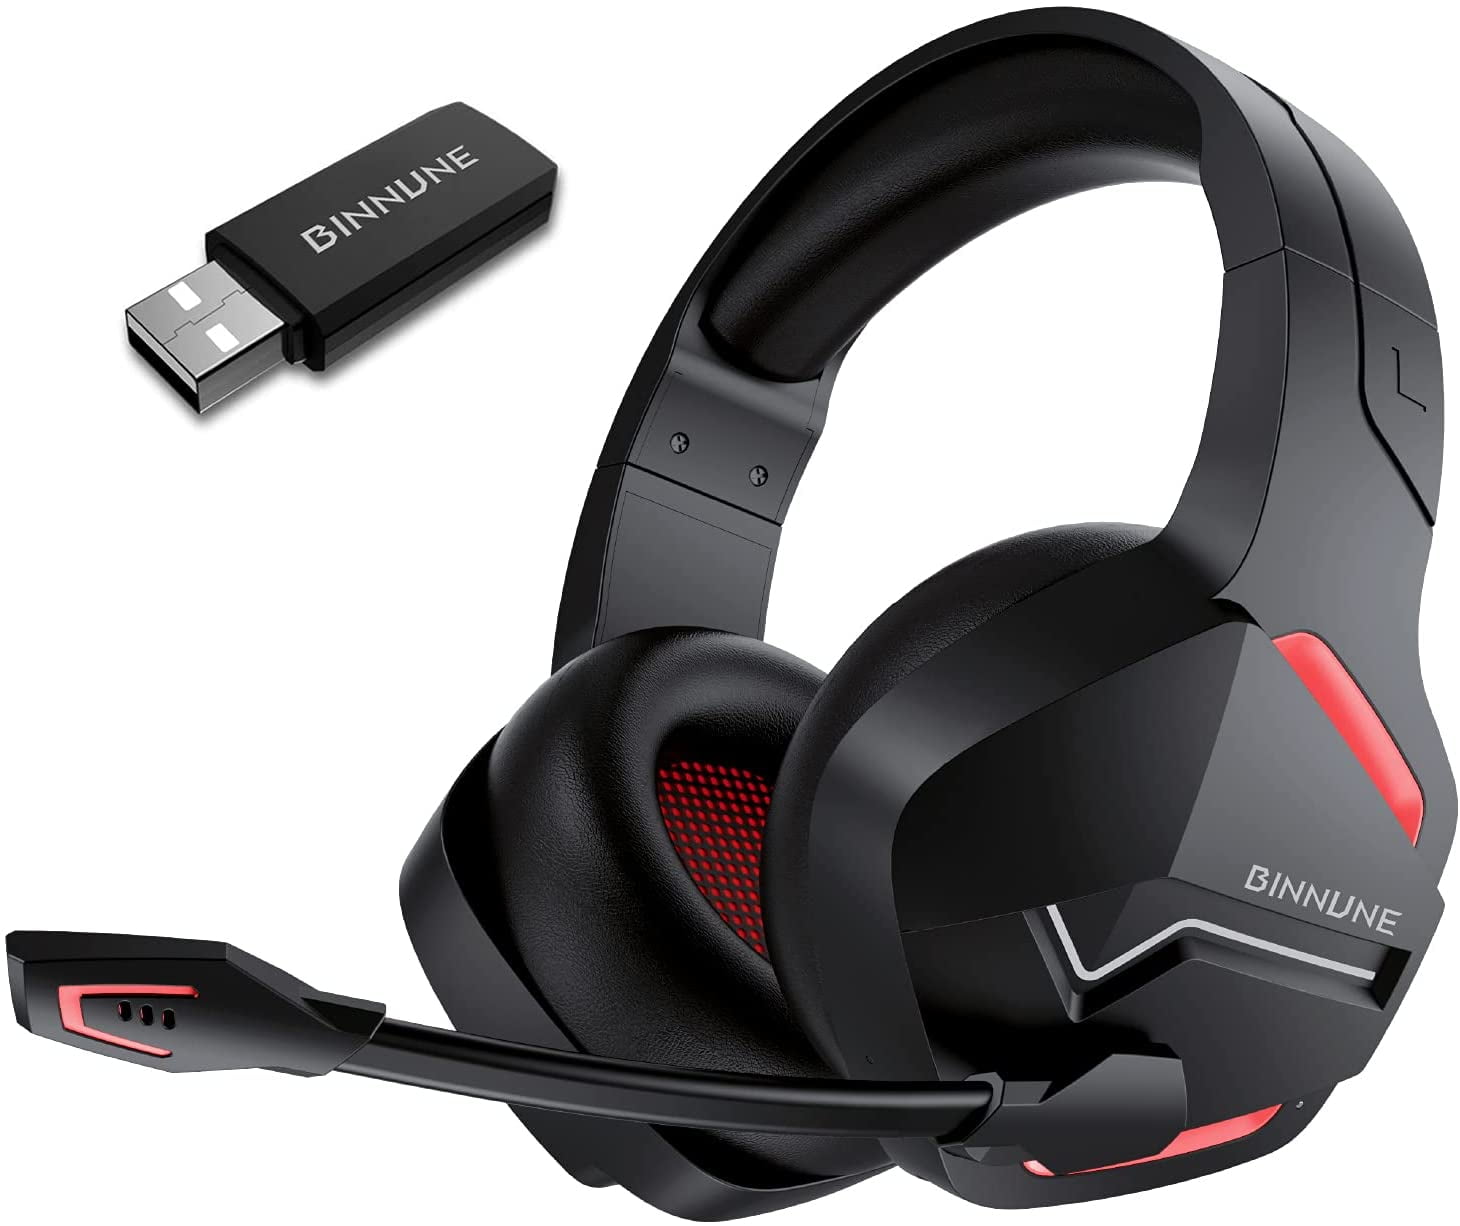 landing Banzai kredsløb Wireless Gaming Headset with Microphone for PC PS4 PS5 , 2.4G Wireless  Bluetooth USB Gamer Headphones with Mic for Laptop Computer - Walmart.com